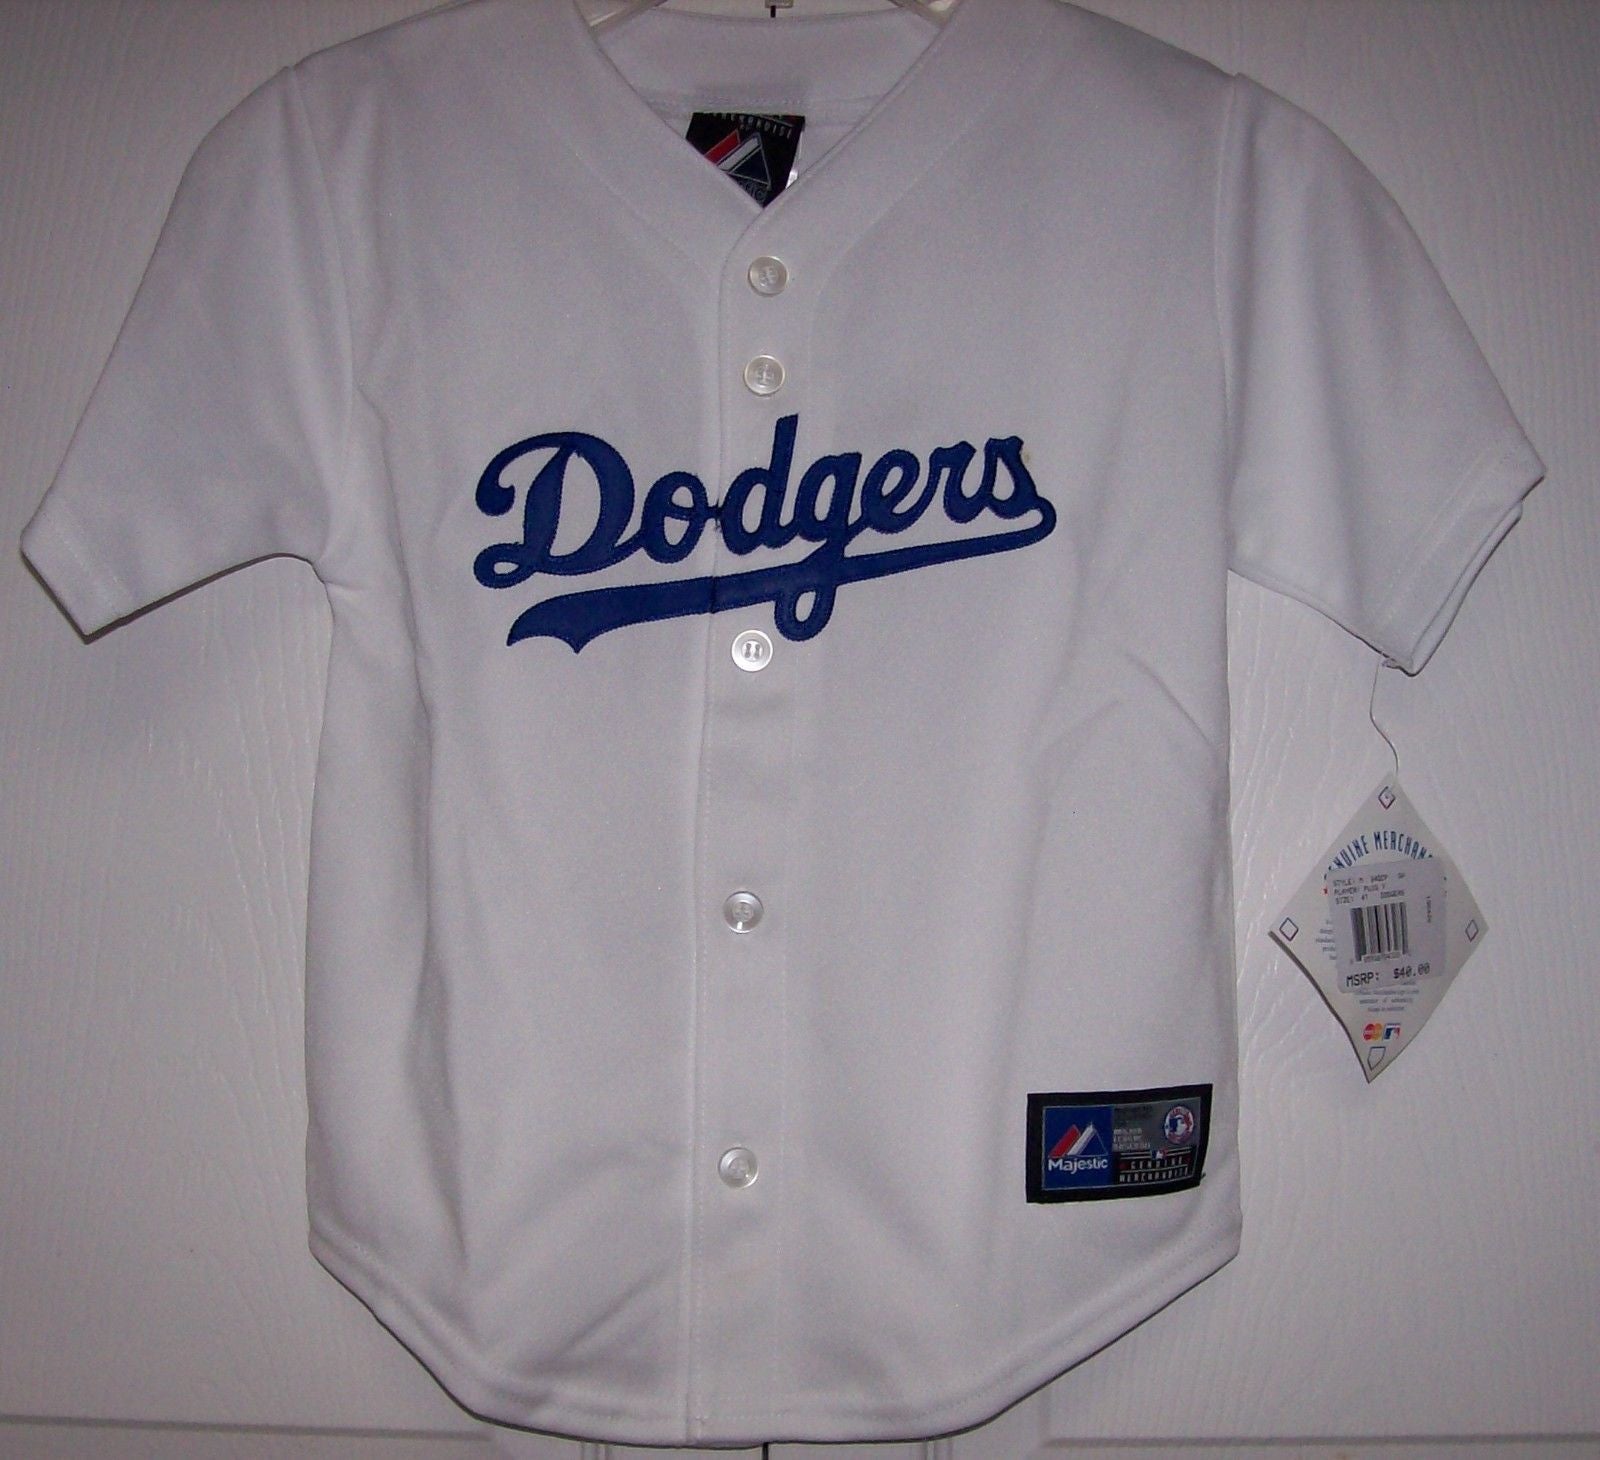 PUIG Los Angeles Dodgers BOYS Large 7 Majestic MLB Baseball jersey Whi -  Hockey Jersey Outlet